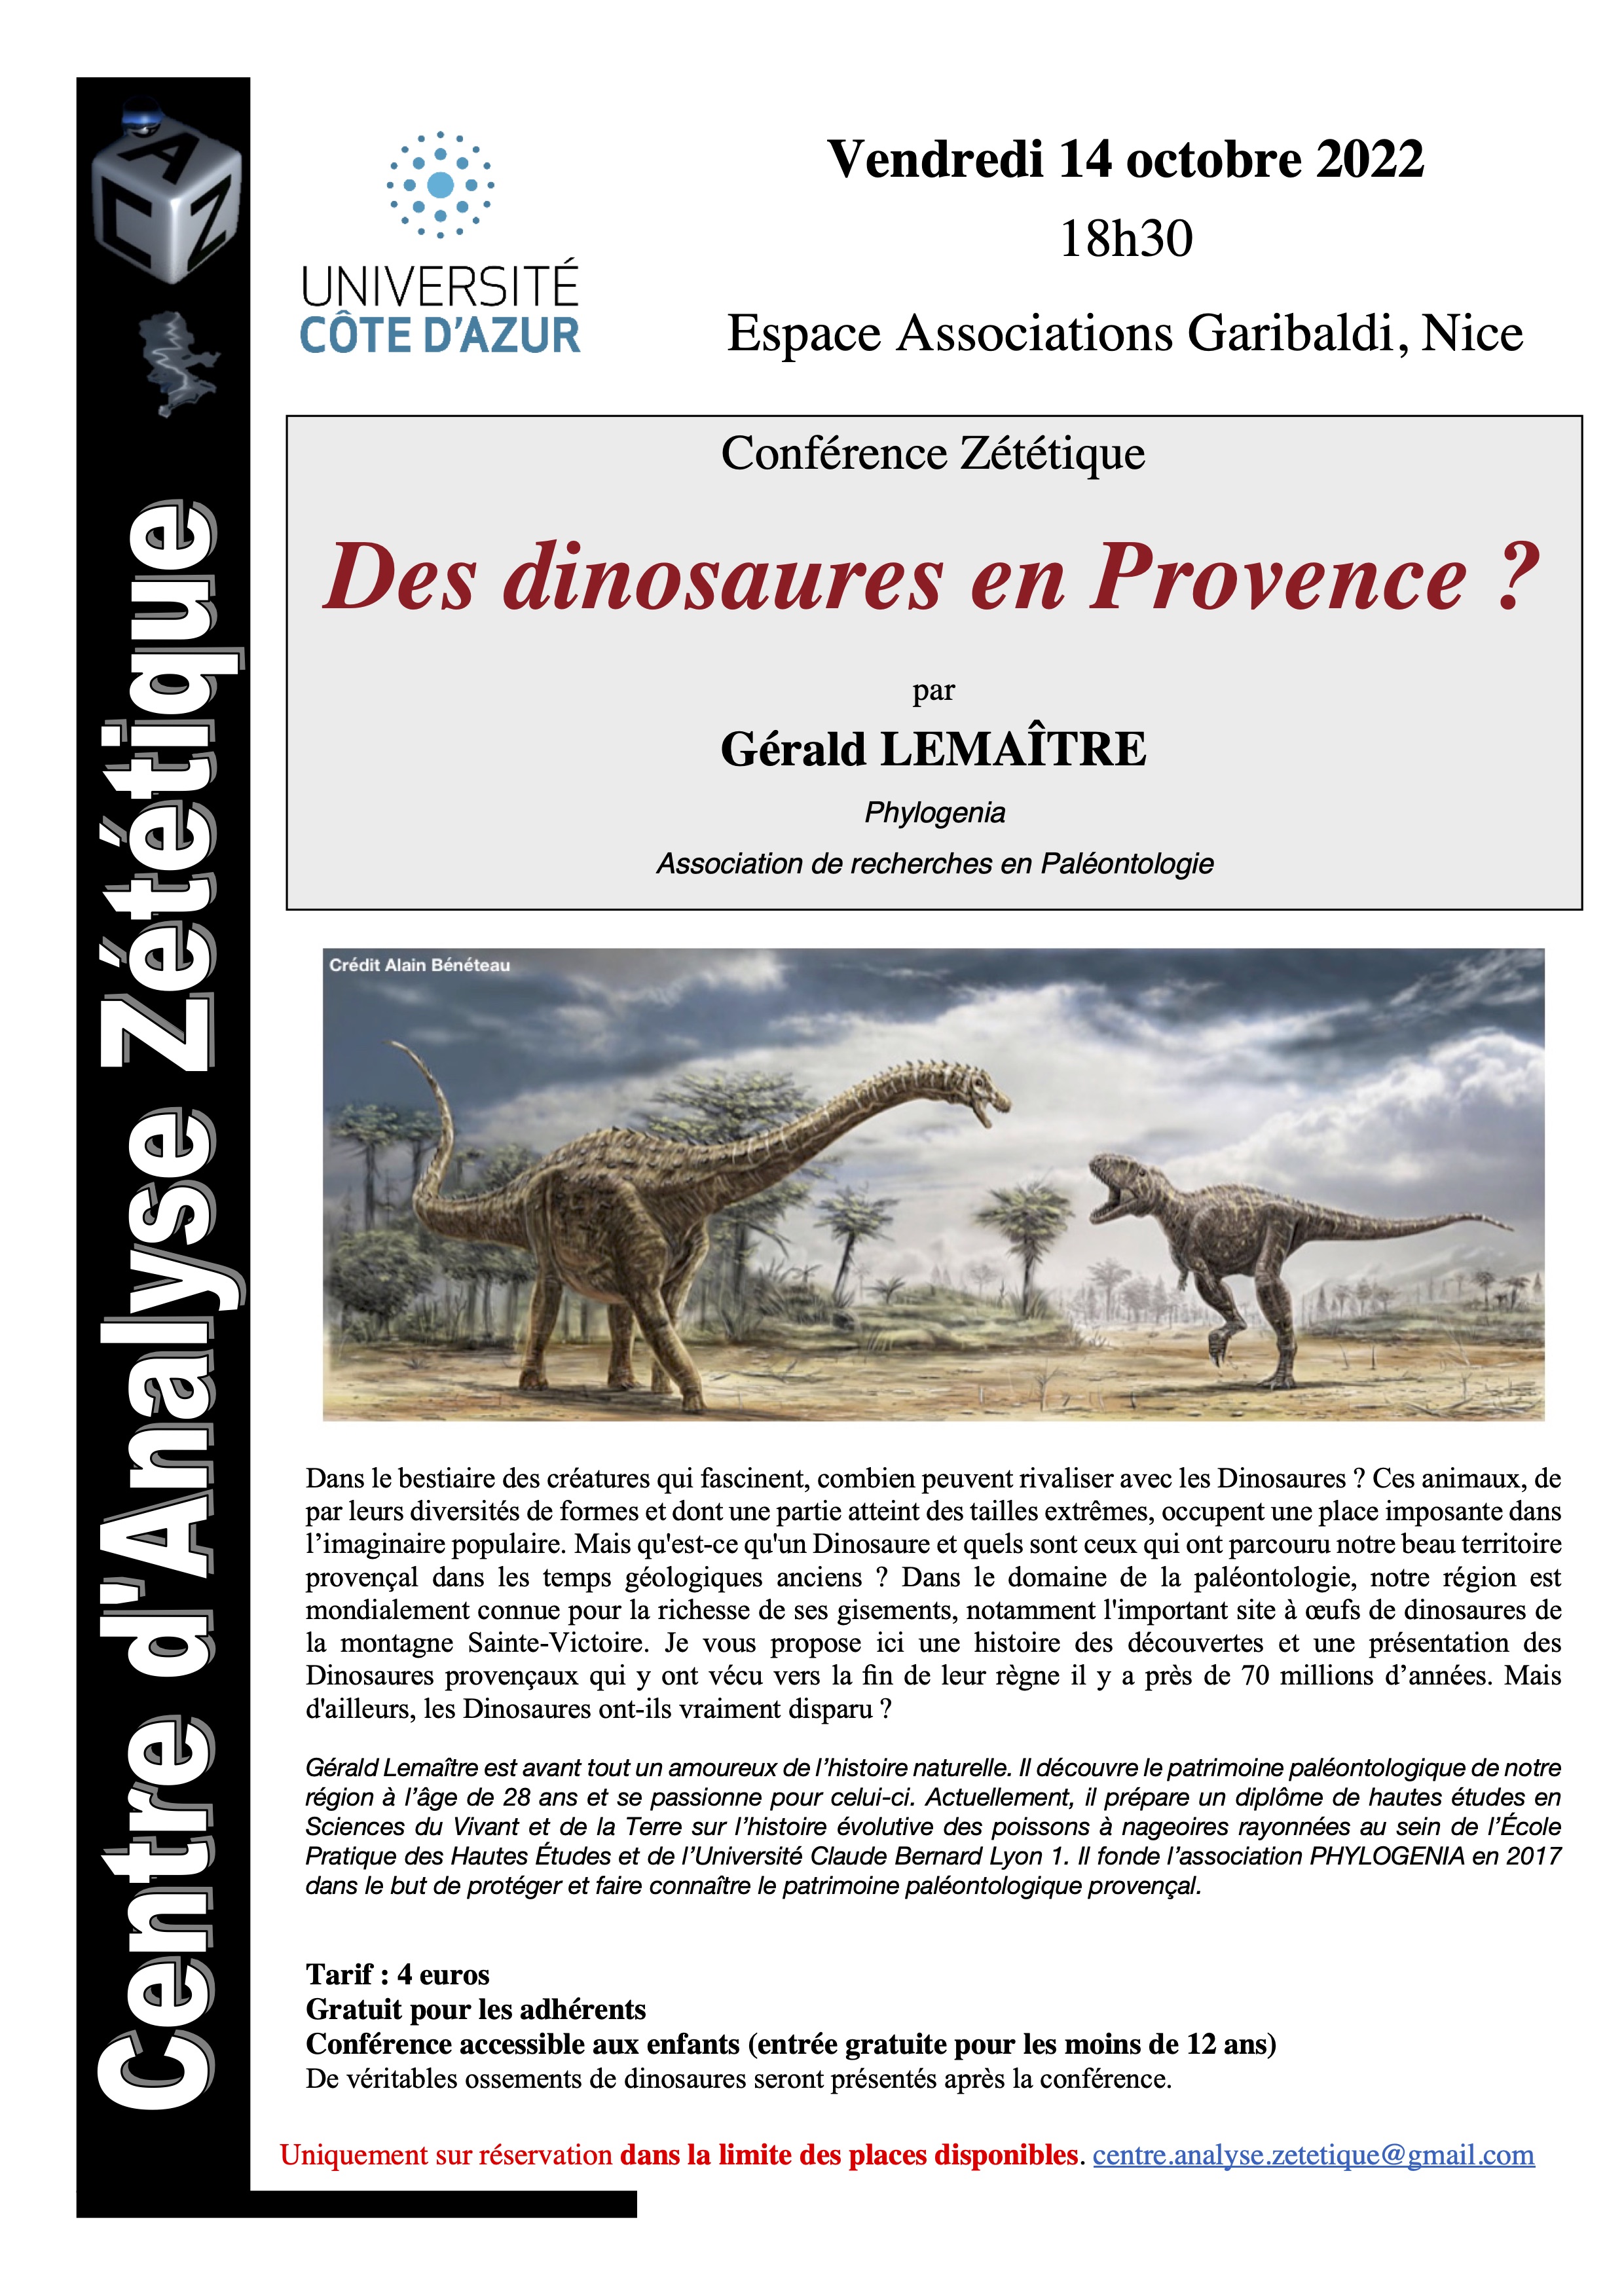 2022.10.14-Conf-GL-Dinosaures